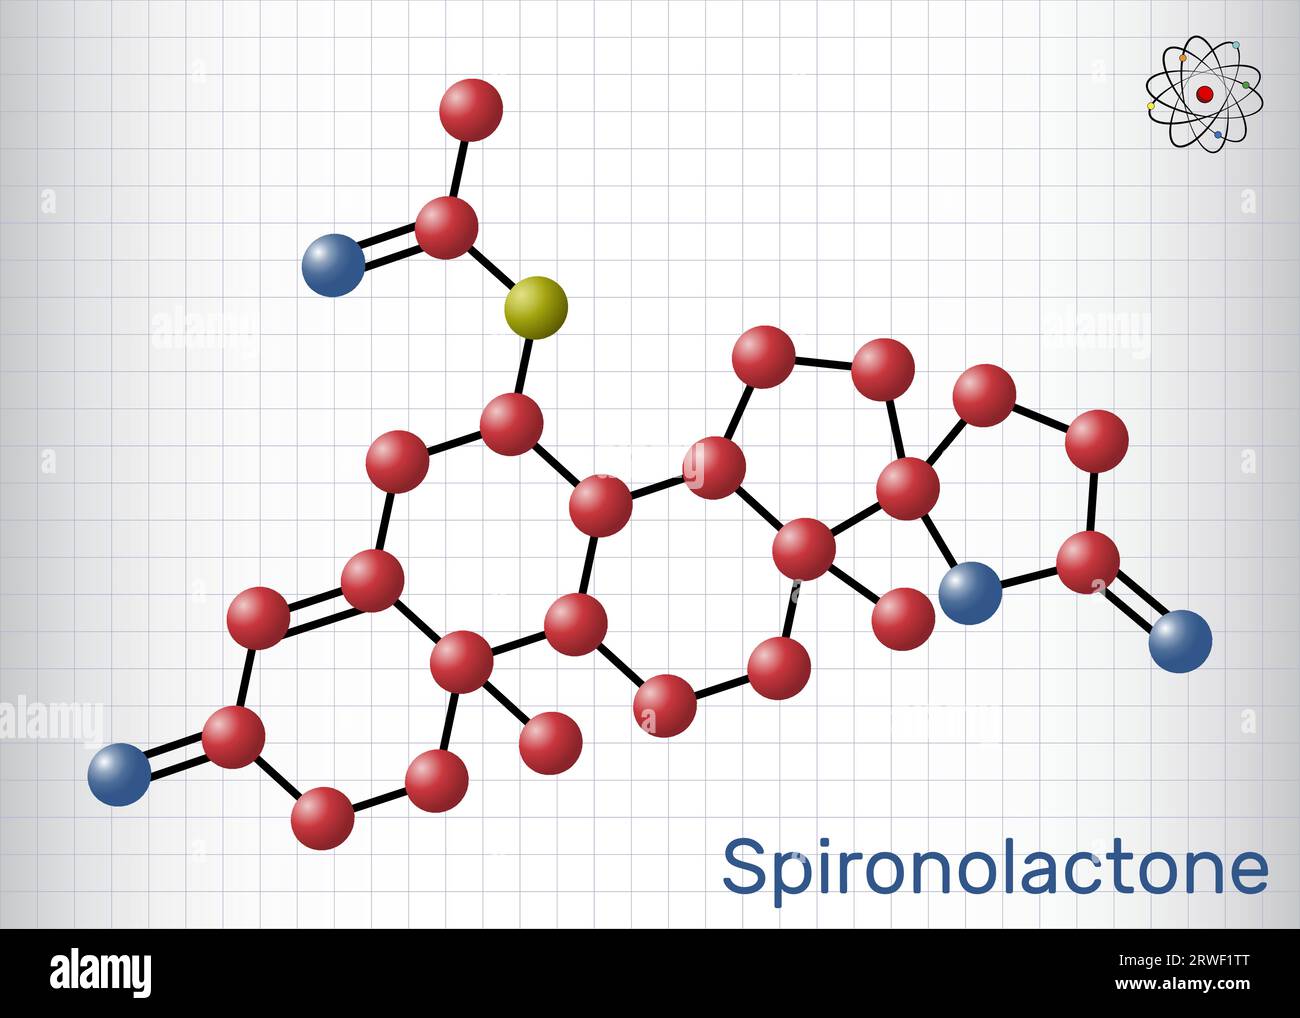 Spironolactone molecule. It is aldosterone receptor antagonist used for the treatment of hypertension, hyperaldosteronism, edema. Structural chemical Stock Vector